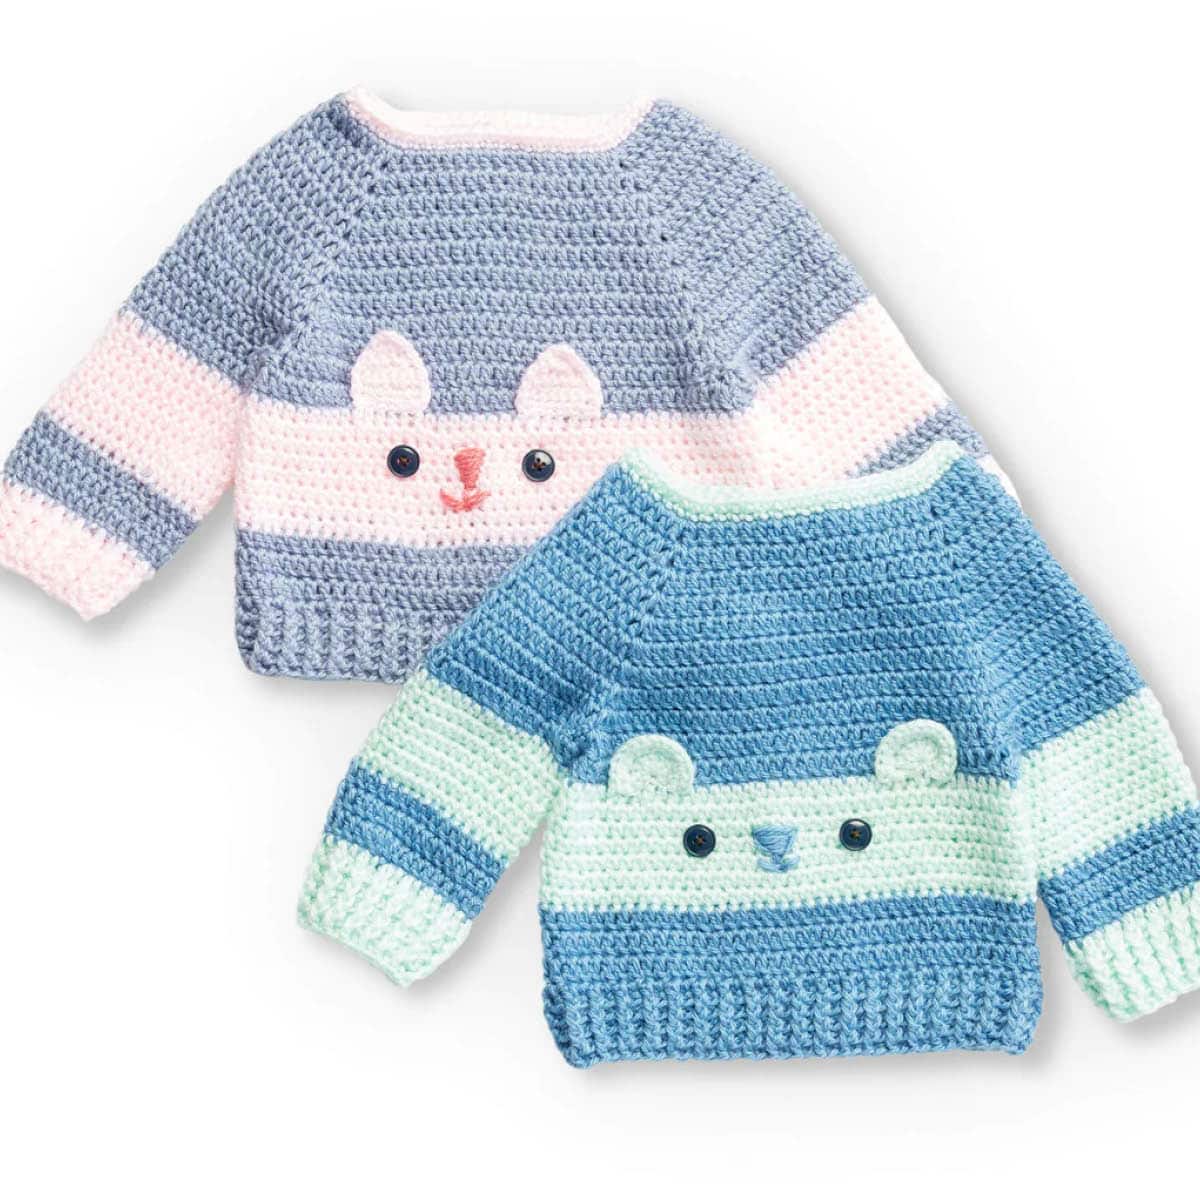 Crochet Character Baby Sweater Patterns